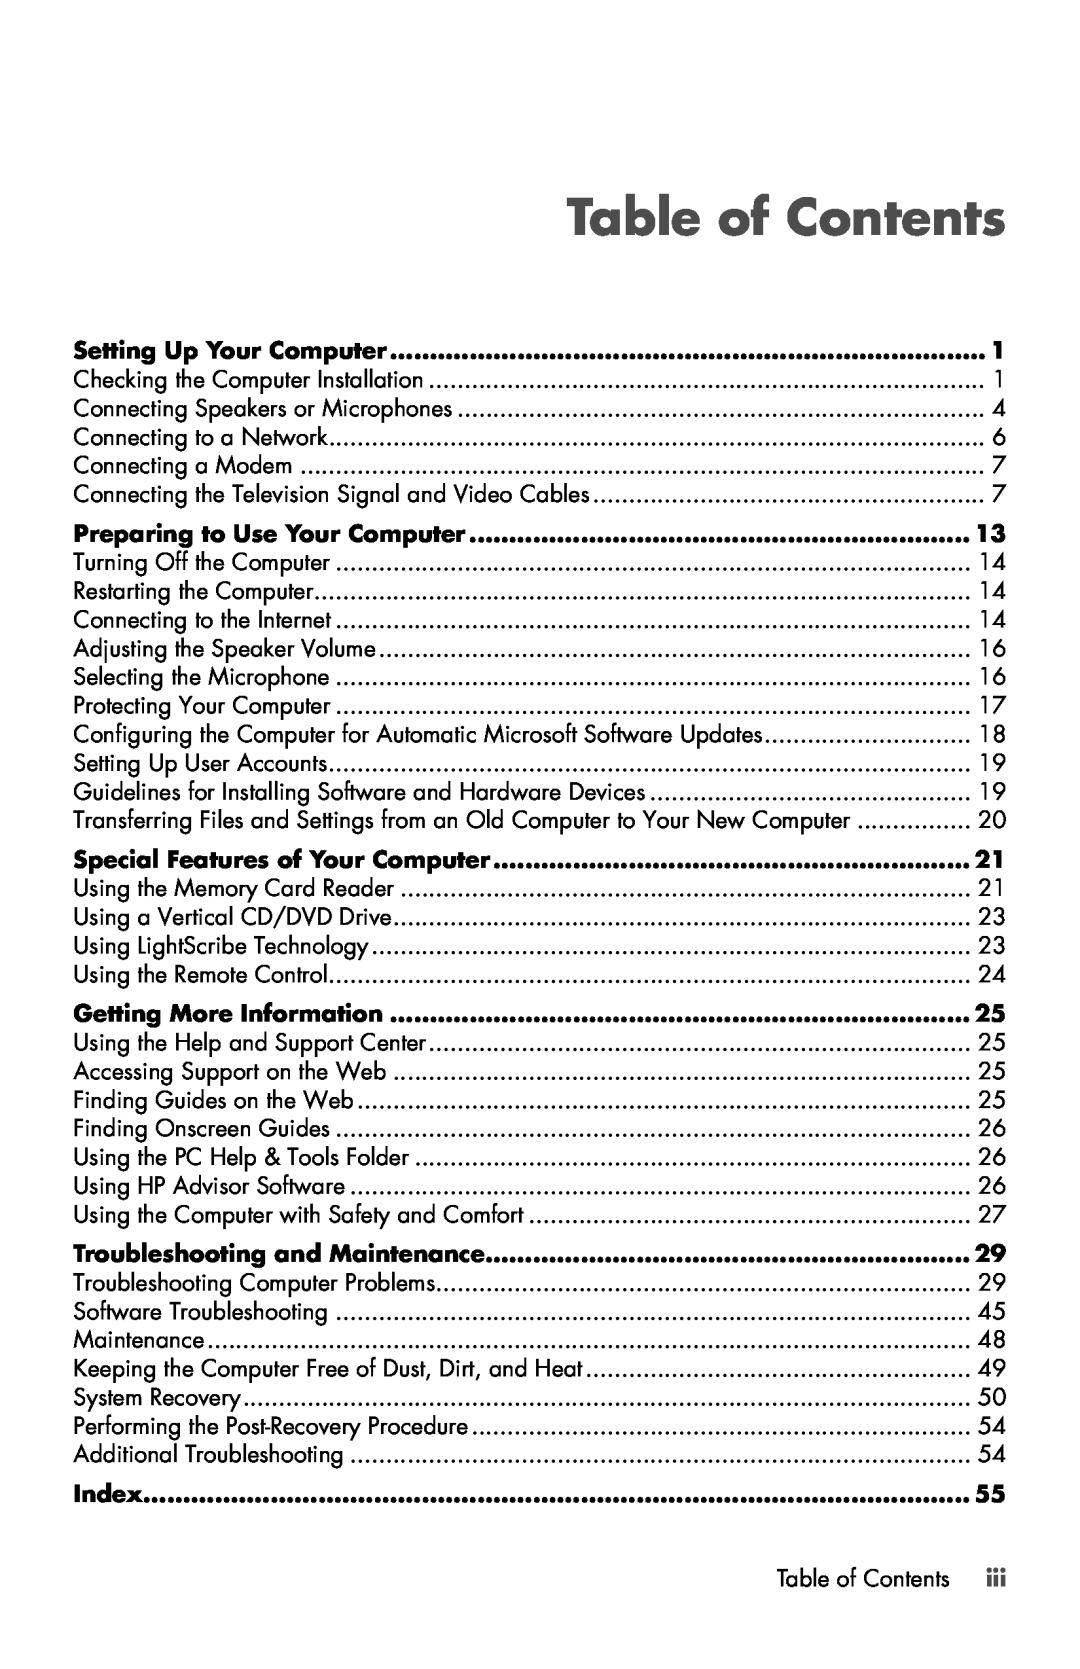 HP 120-1134 Table of Contents, Setting Up Your Computer, Preparing to Use Your Computer, Special Features of Your Computer 